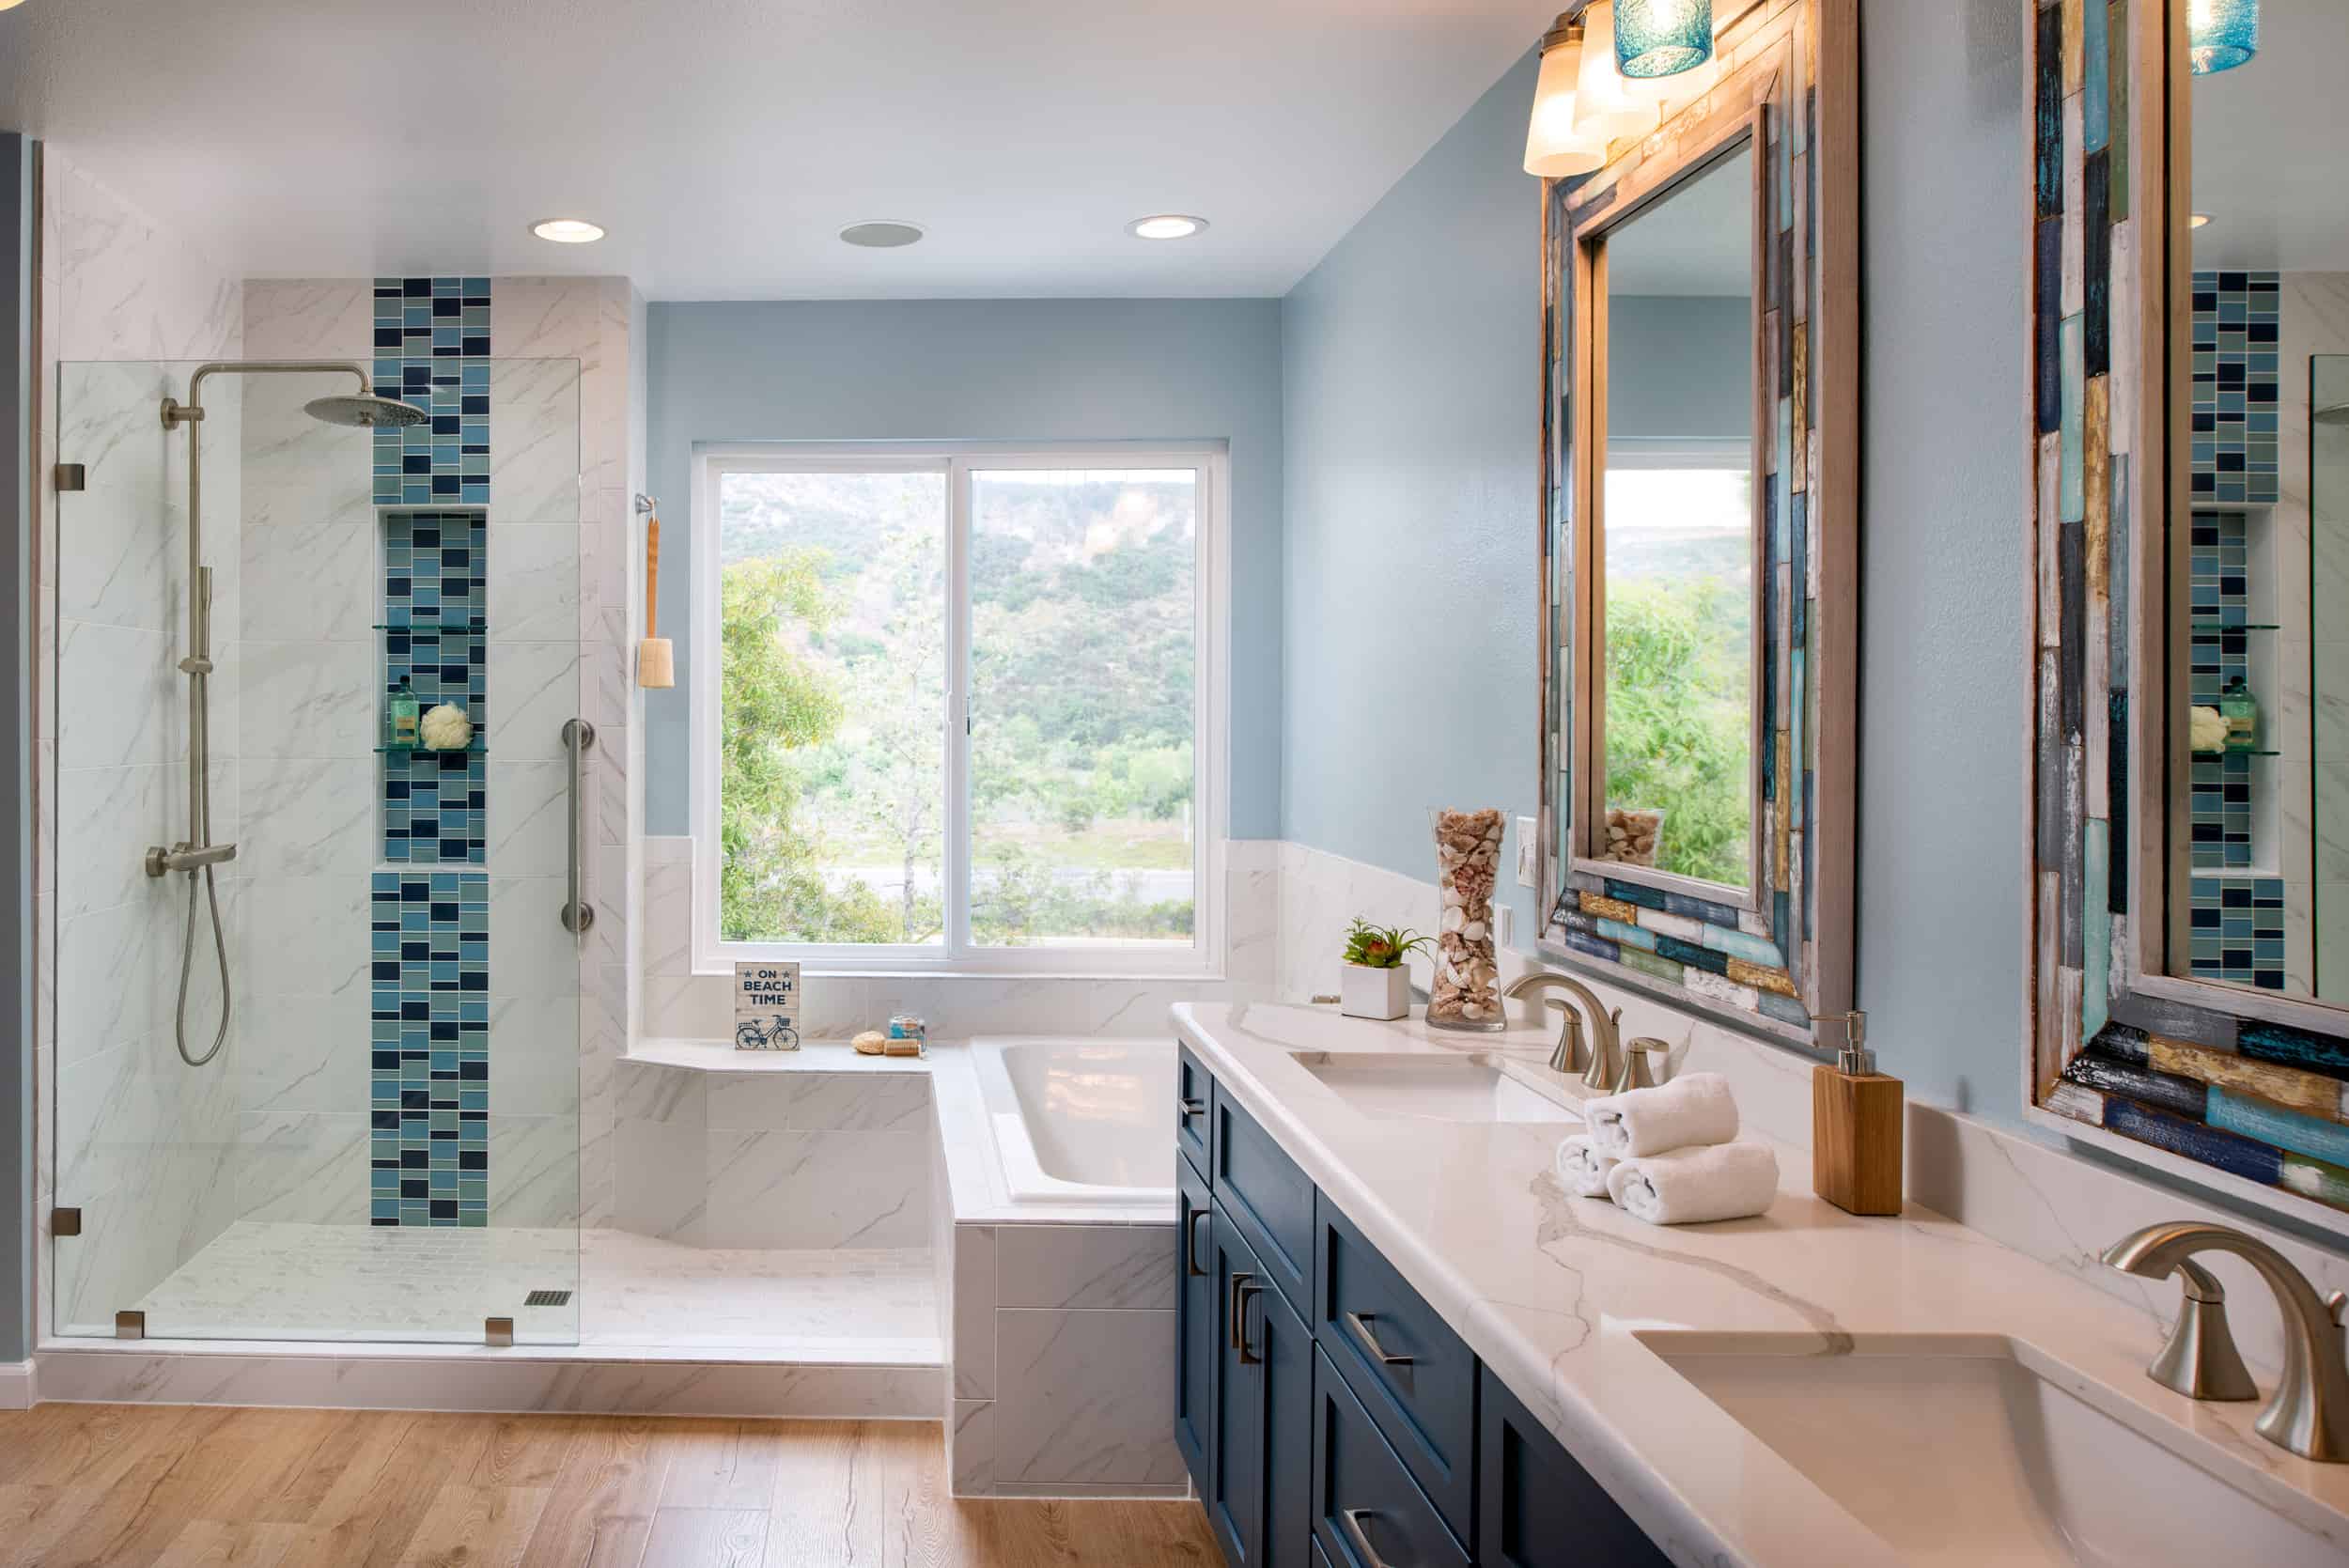 Cost Of Adding A Bathroom Remodel Works, How Much It Cost To Add A Bathroom House